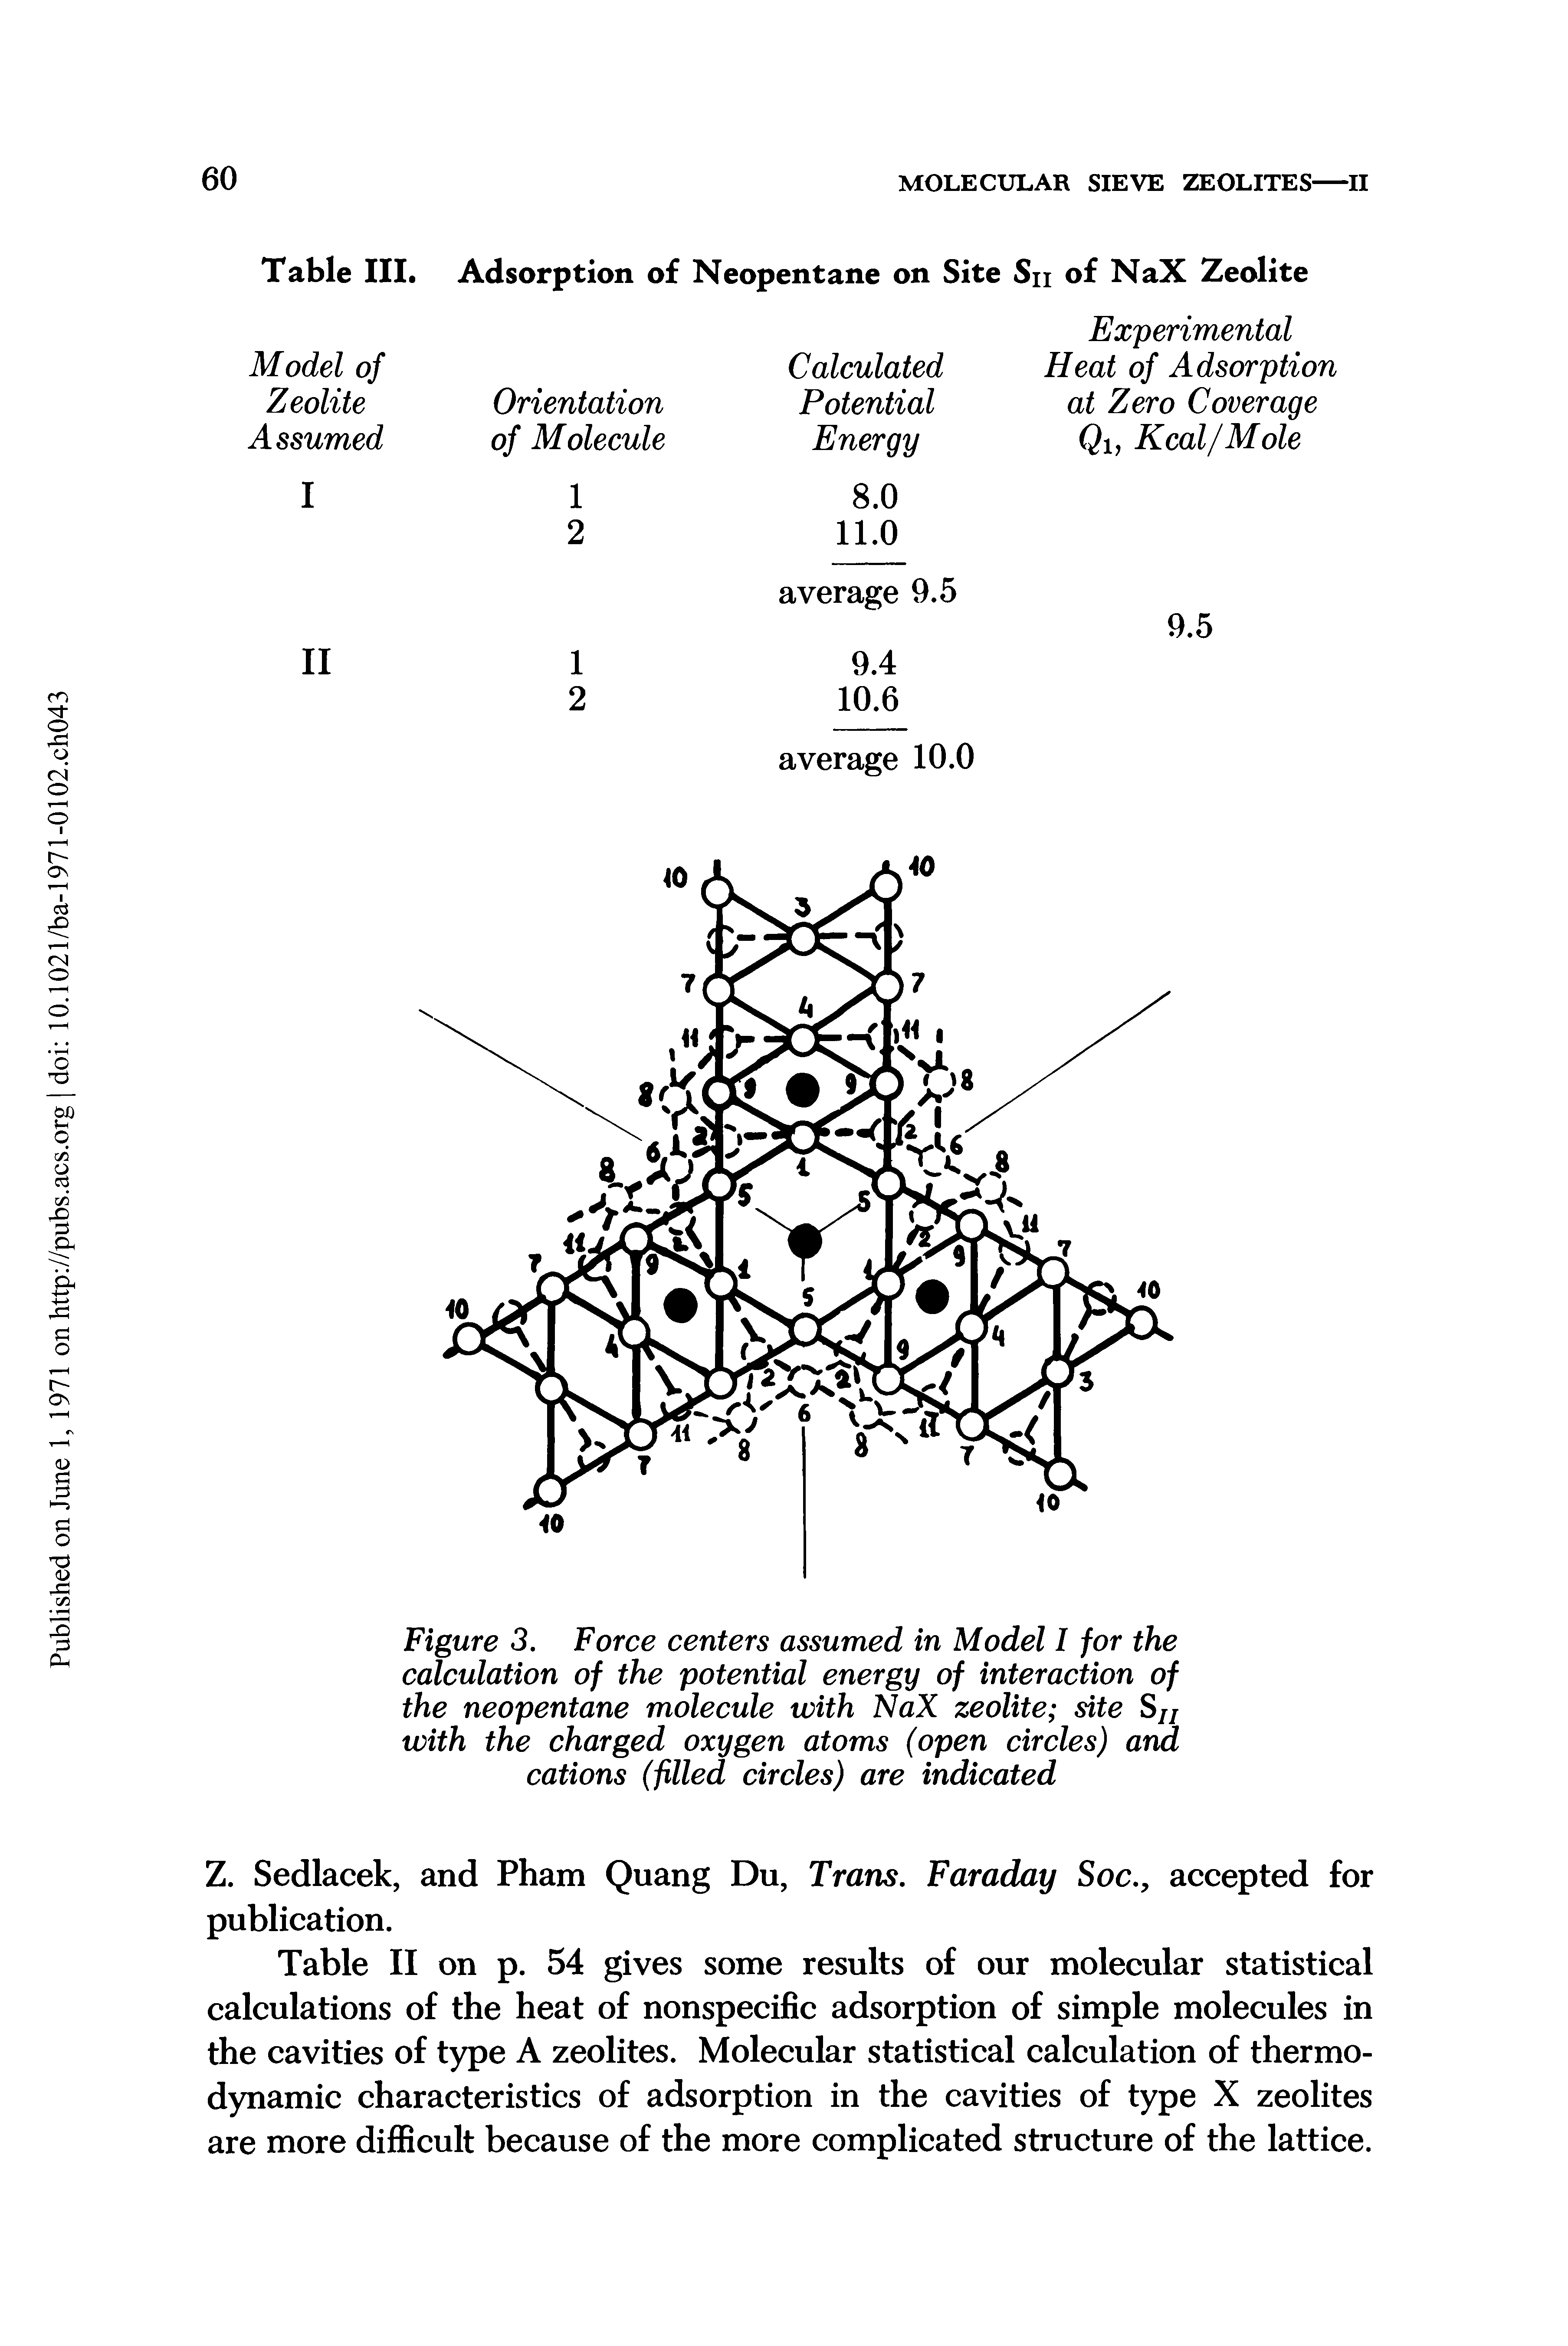 Table II on p. 54 gives some results of our molecular statistical calculations of the heat of nonspecific adsorption of simple molecules in the cavities of type A zeolites. Molecular statistical calculation of thermodynamic characteristics of adsorption in the cavities of type X zeolites are more difficult because of the more complicated structure of the lattice.